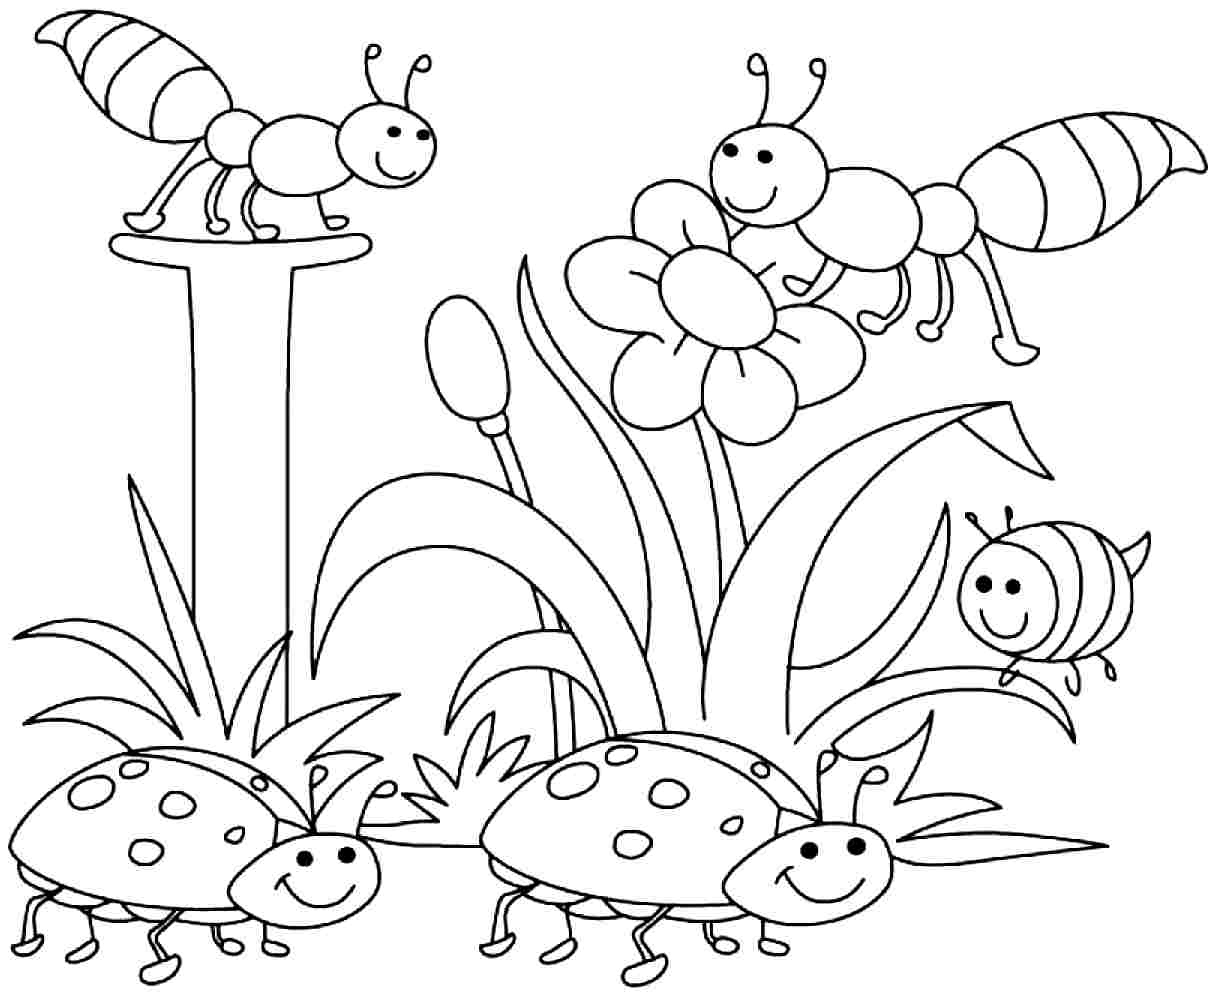 Printable Coloring Pictures For Spring - High Quality Coloring Pages